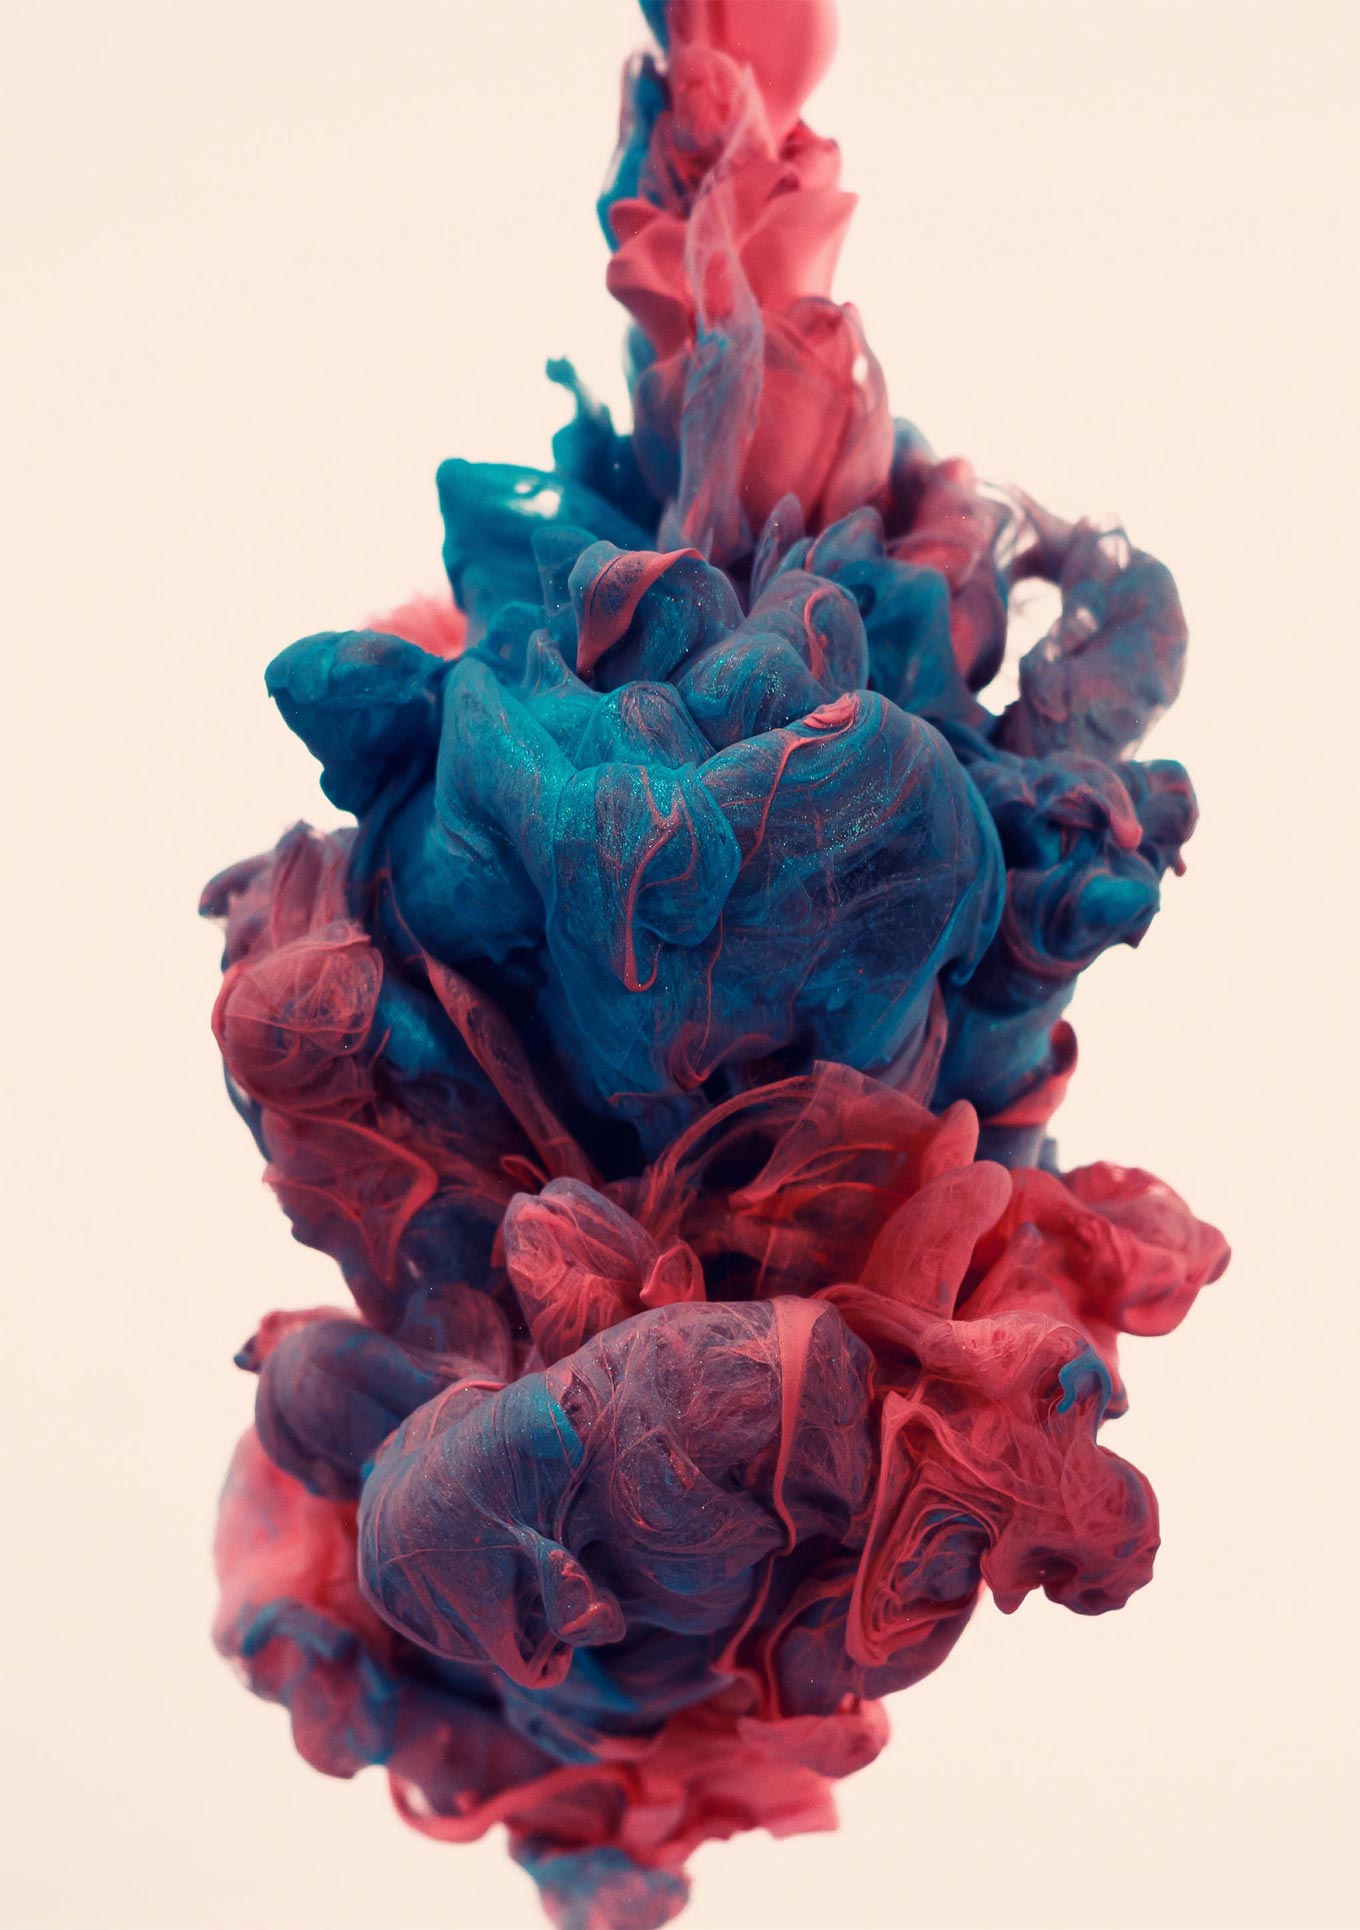 The Lost Fox › Amazing ink manipulations by Alberto Seveso